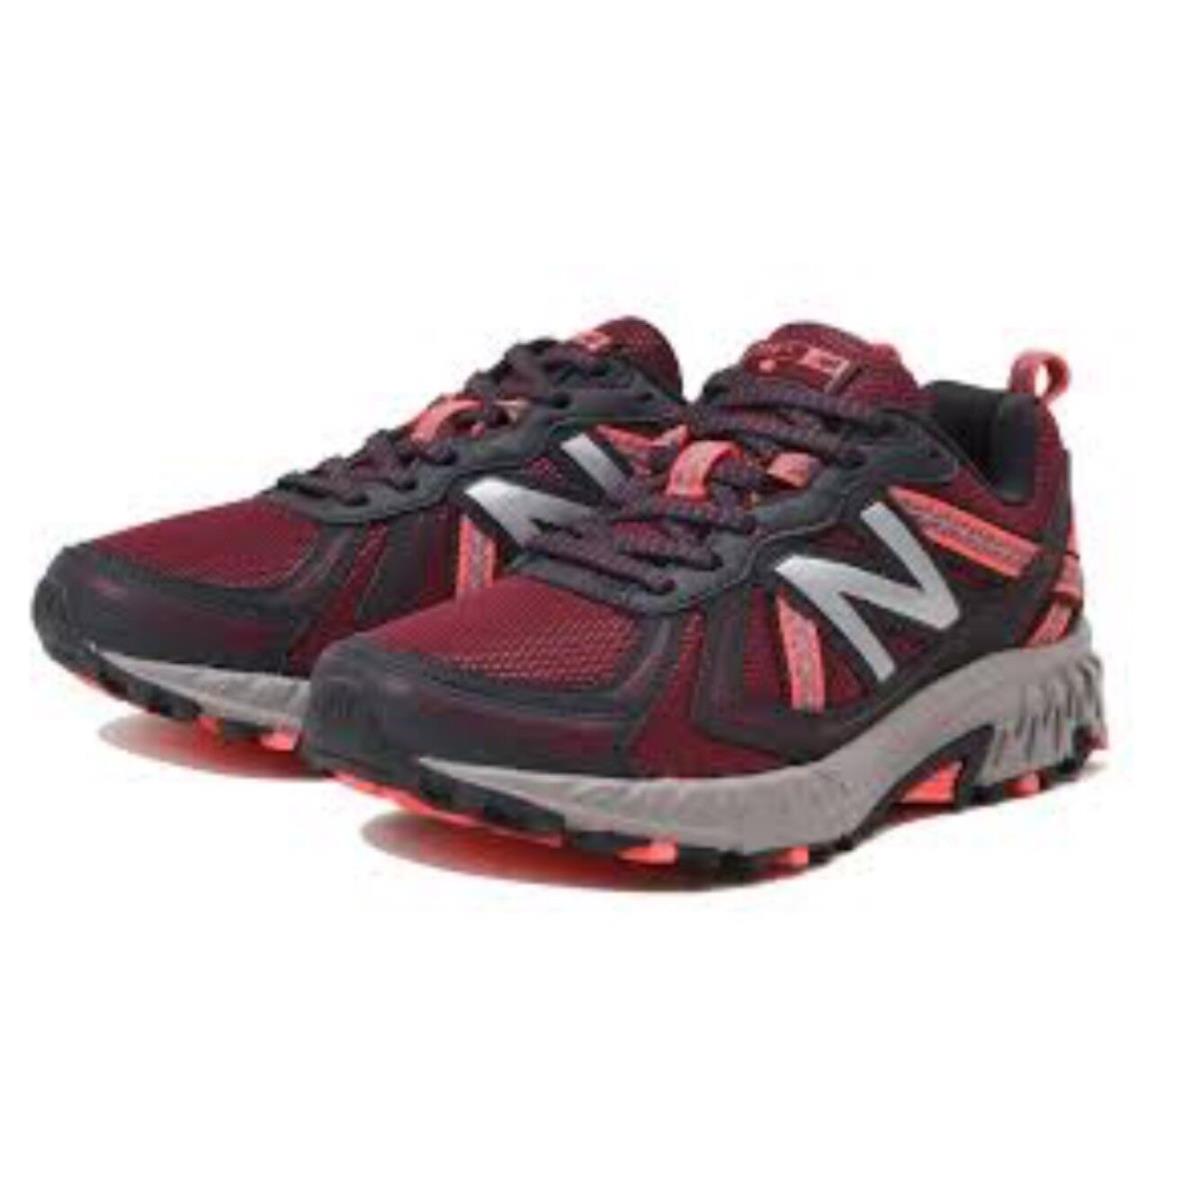 New Women s New Balance Wt410cx5 Trail Running Shoes Size 5 D Wide